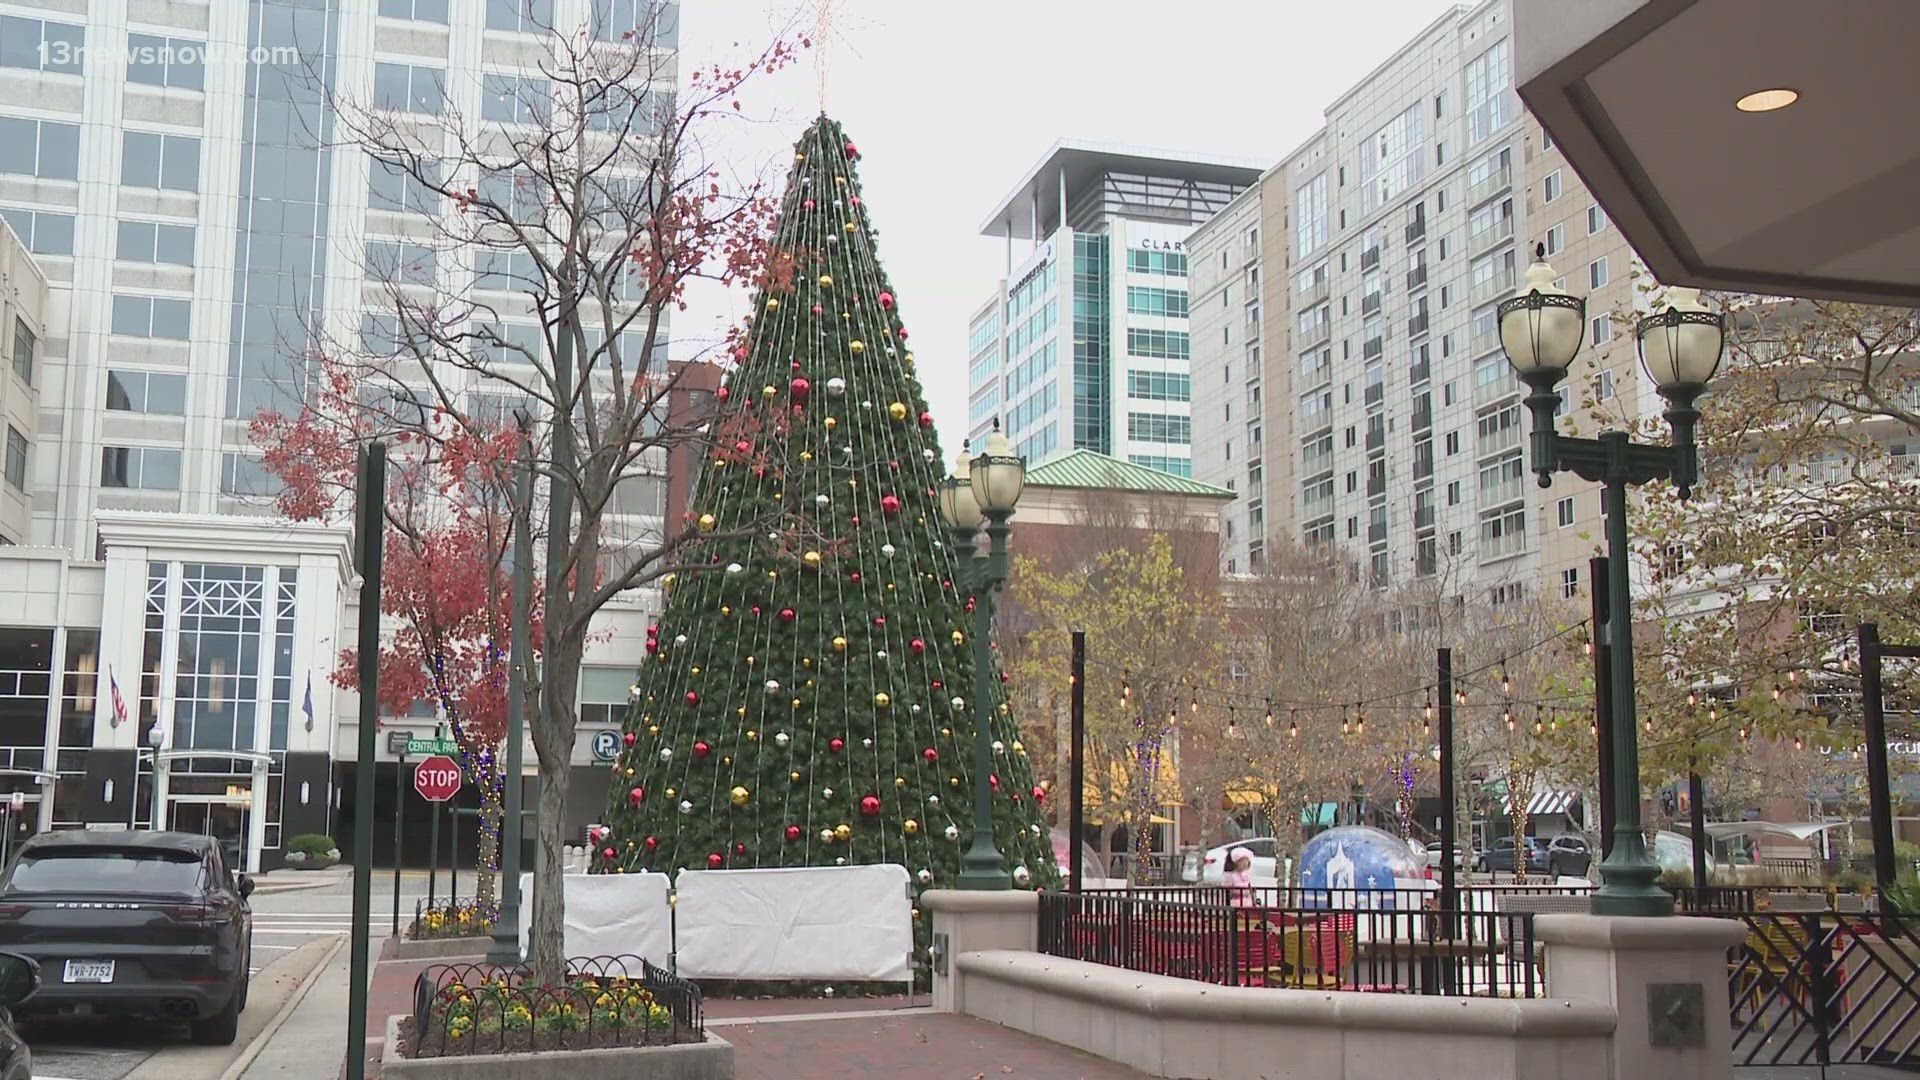 Christmas lights and larger-than-life decorations are popping up at the Beach City. Event organizers say they're planning a huge outdoor party.